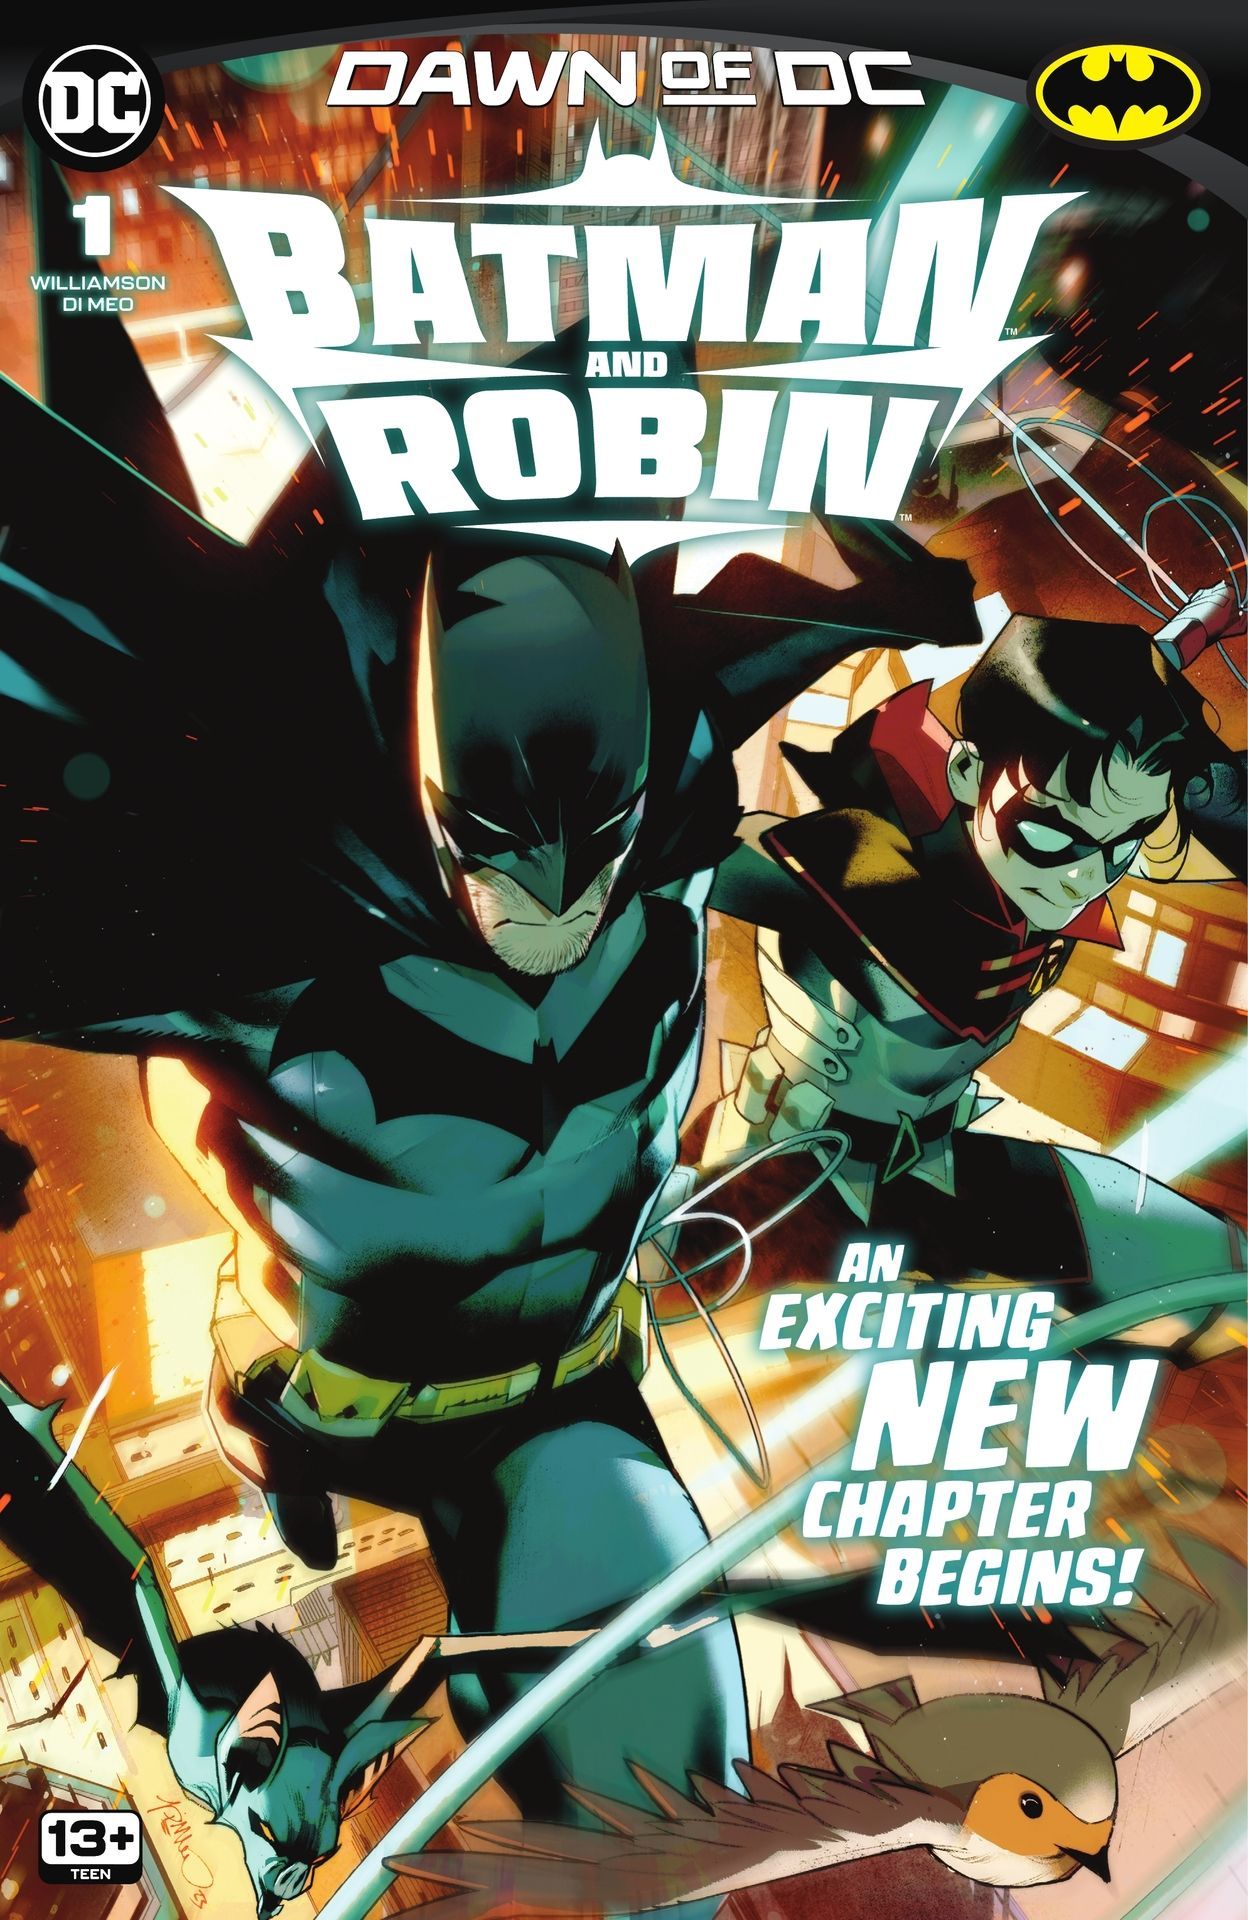 Cover A of Batman and Robin #1